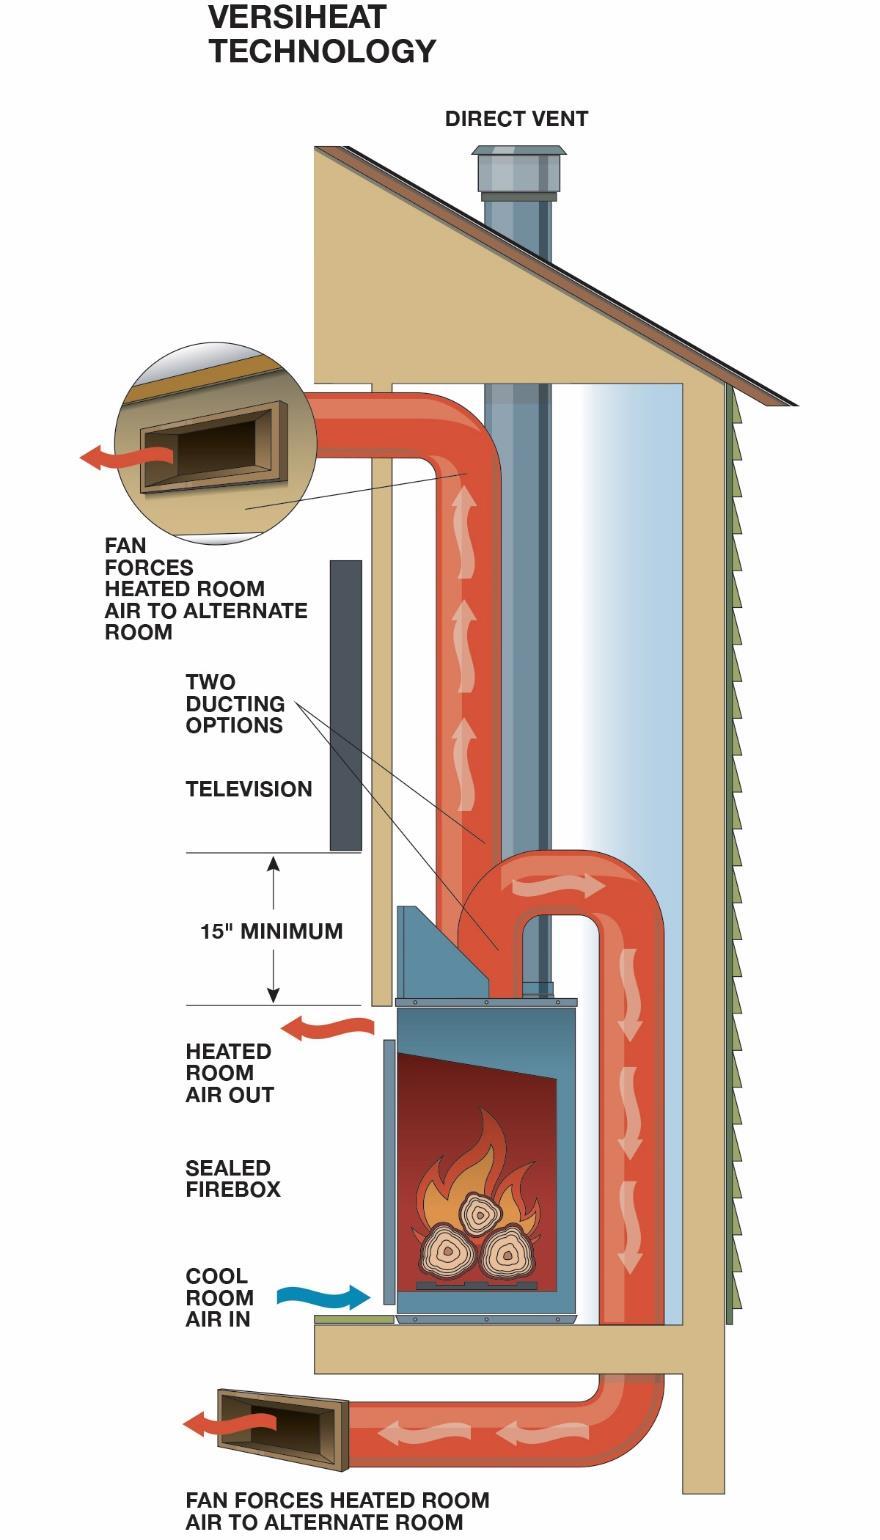 3.2.1.3.2 Versiheat The Versiheat system uses a fan to redirect heat from the fireplace to an alternate room in the home.